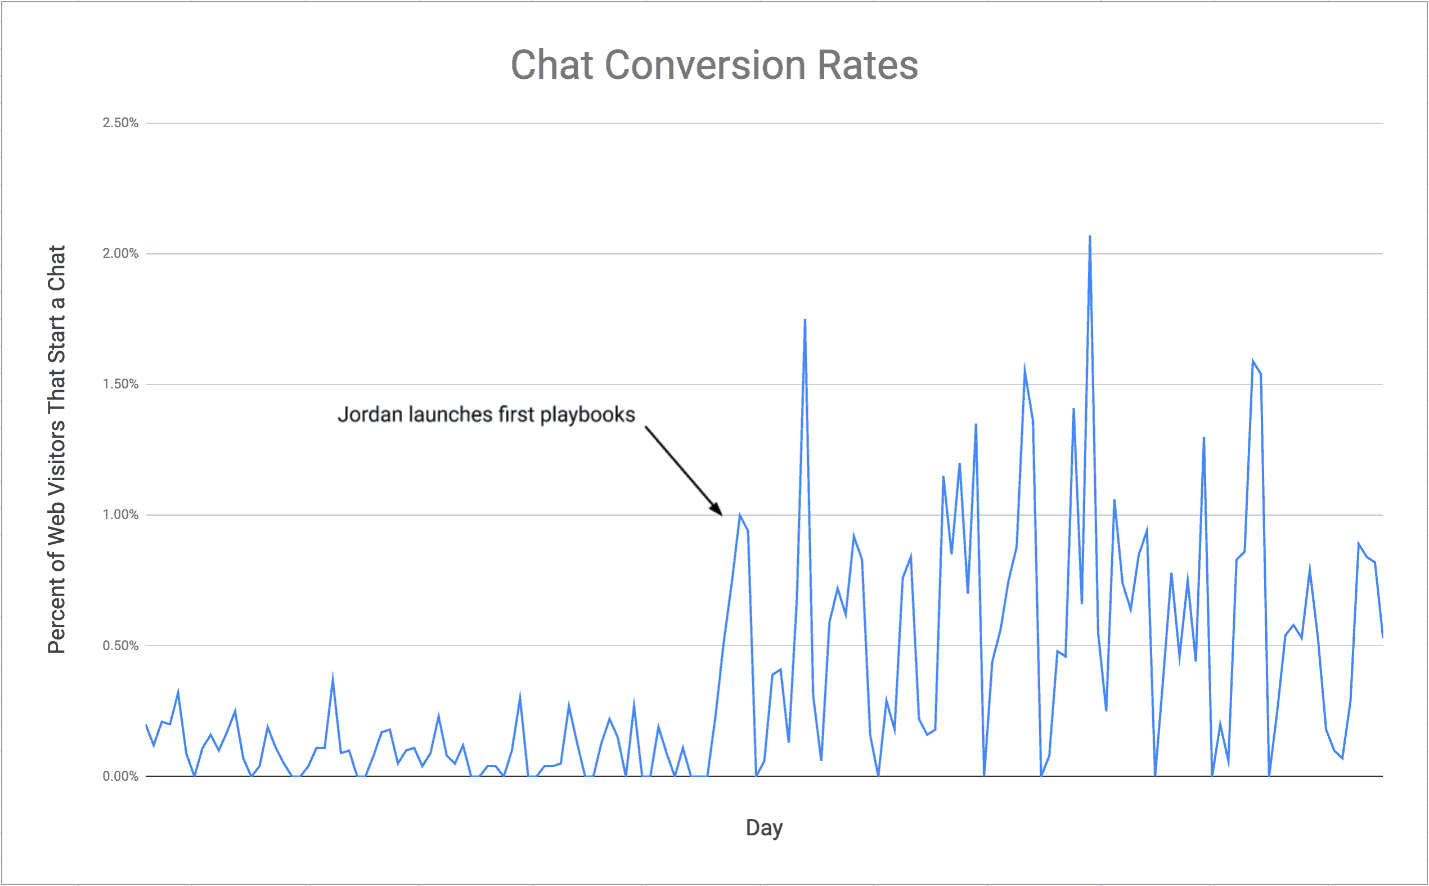 chat conversion rates before and after Jordan's playbook